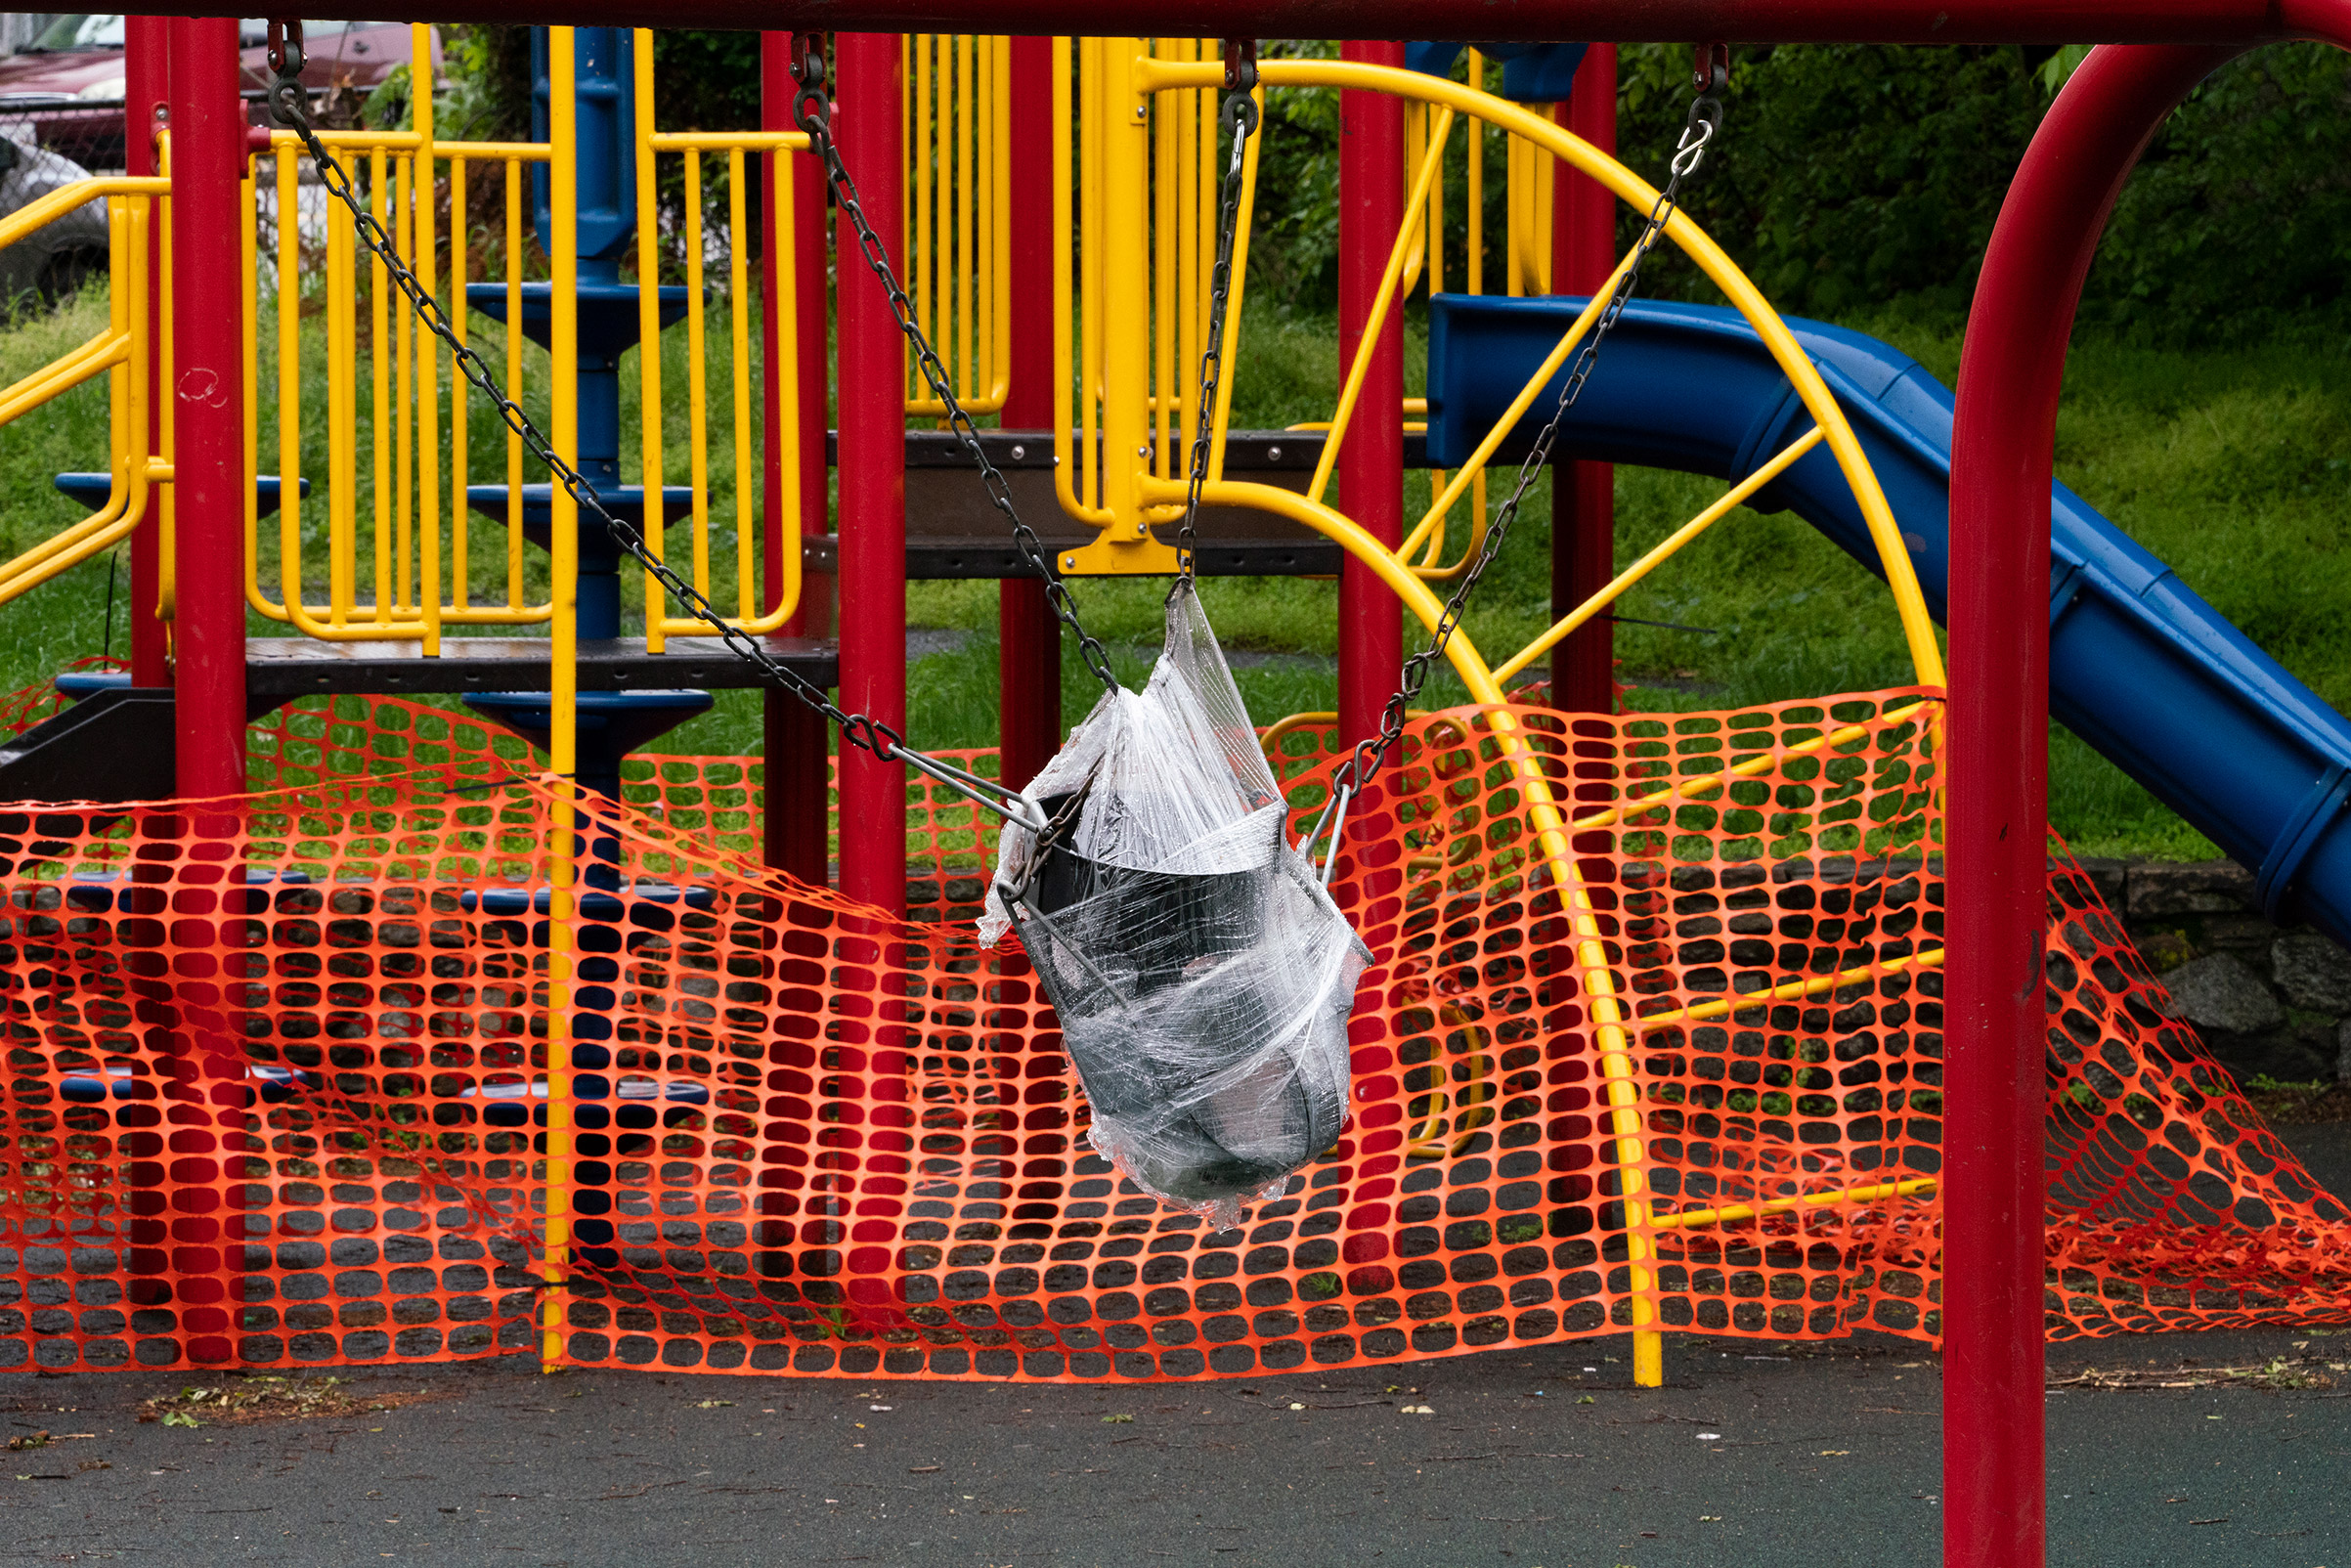 A closed playground during the stay-at-home order due to the Coronavirus in Baltimore, Md., on April 24. (Peter van Agtmael—Magnum Photos for TIME)